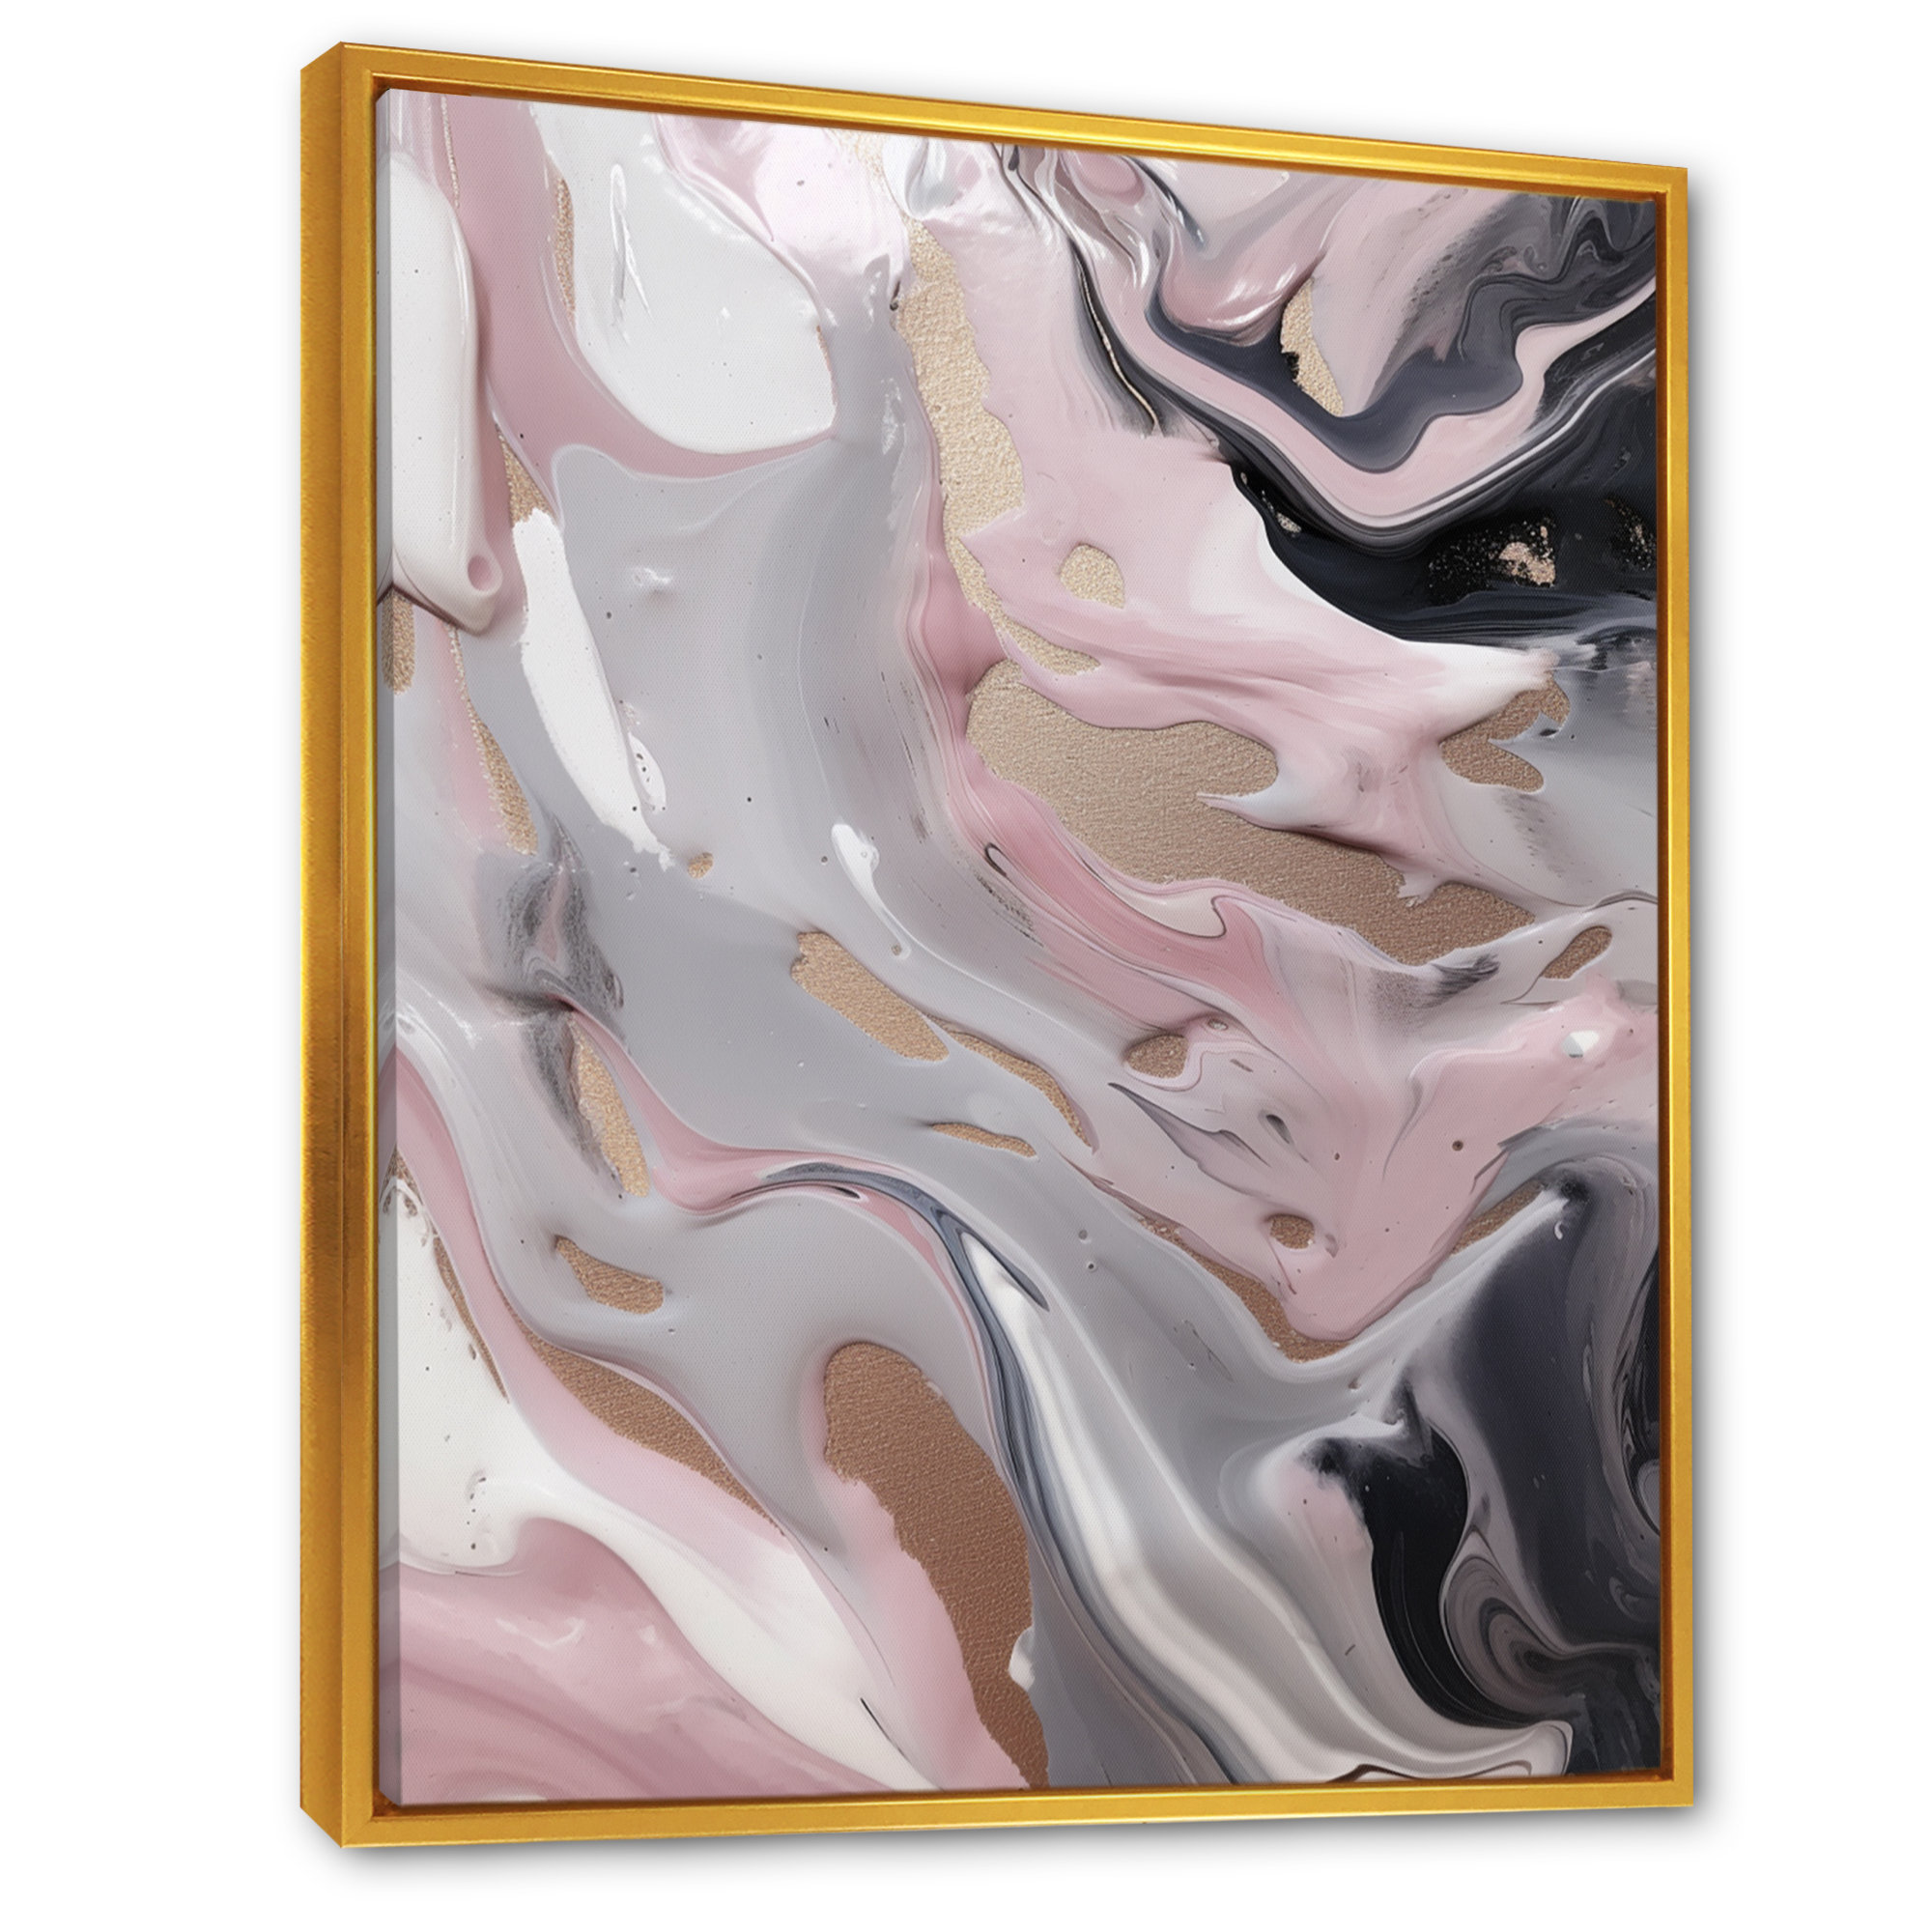 Solid Marble Paint Artwork IV - Abstract Marble Wall Art Prints Mercer41 Format: Gold Floater Framed, Size: 20 H x 12 W x 1 D